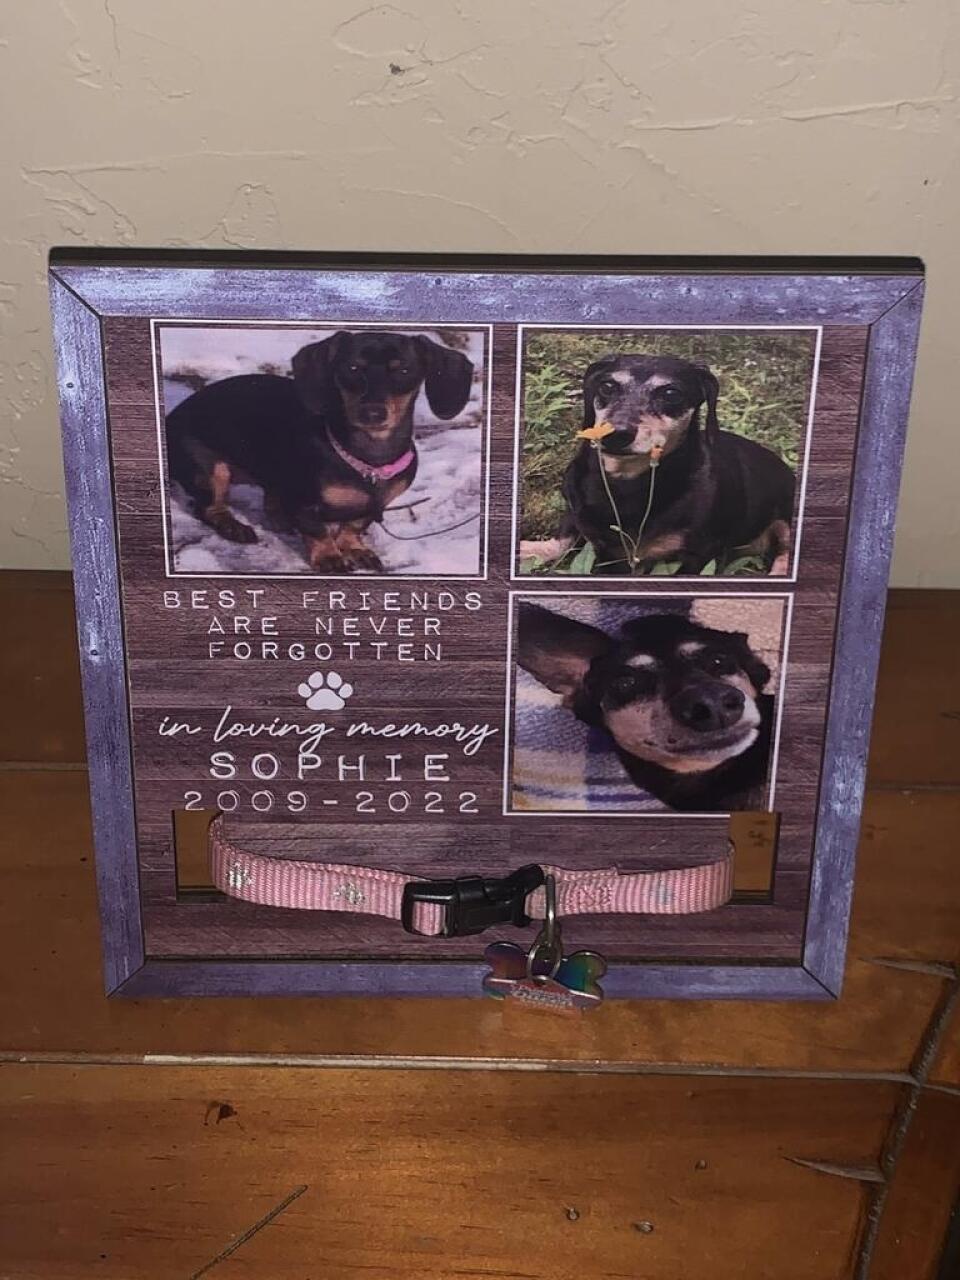 Best Friend Are Never Forgotten In Loving Memory, Personalized Pet Loss Memorial Sign, Custom Photo Sign